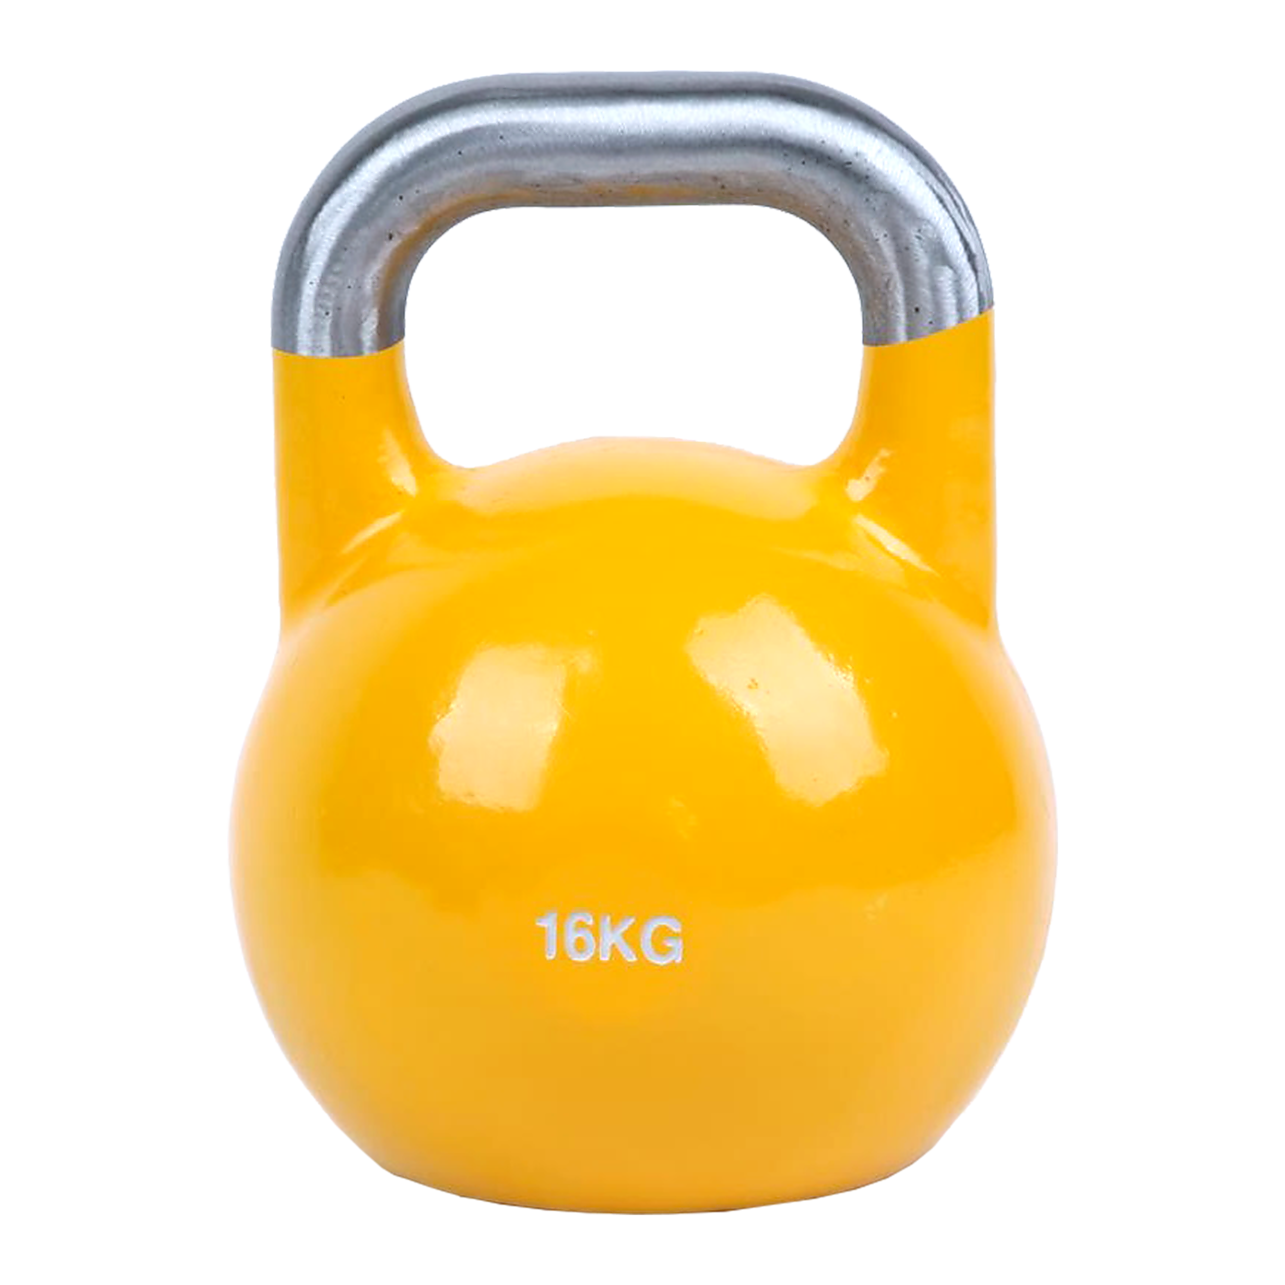 Steel Competition Kettlebell - 16kg